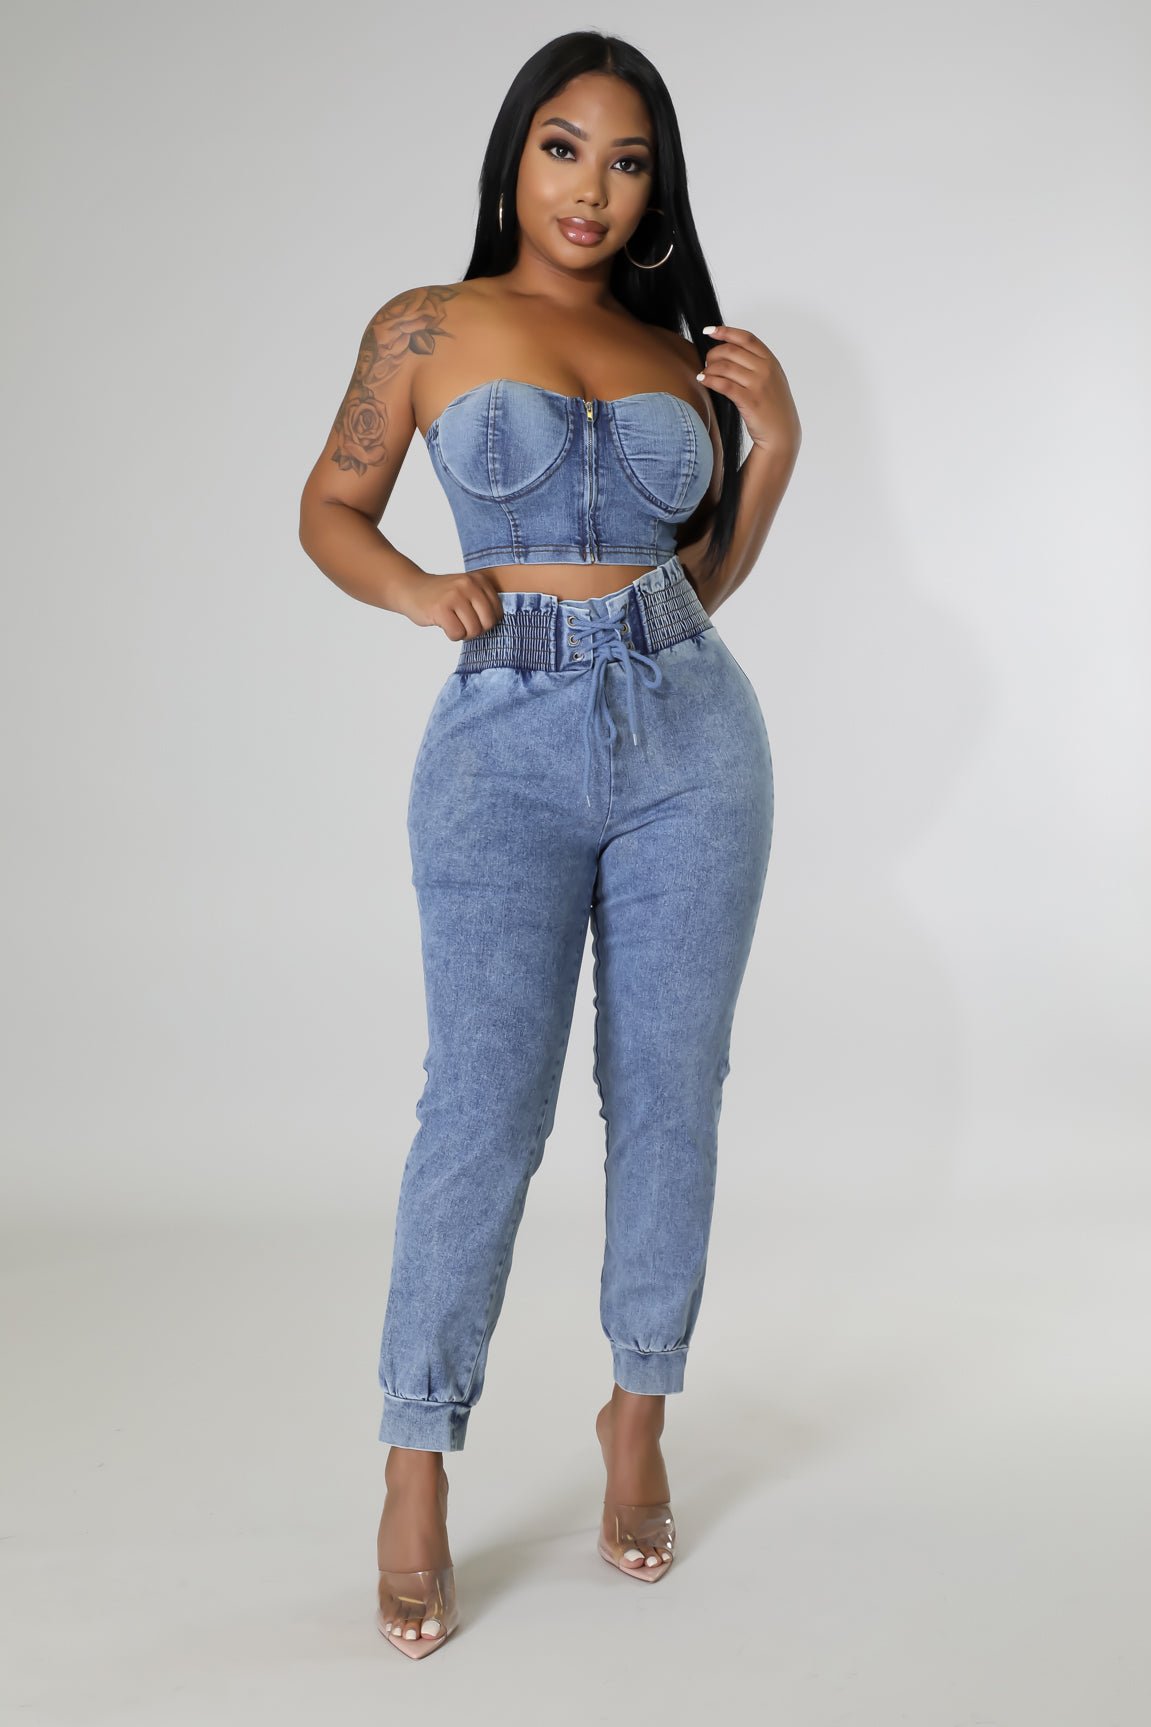 Just Wanna Be Your Girl Pants Set (7352359288993)